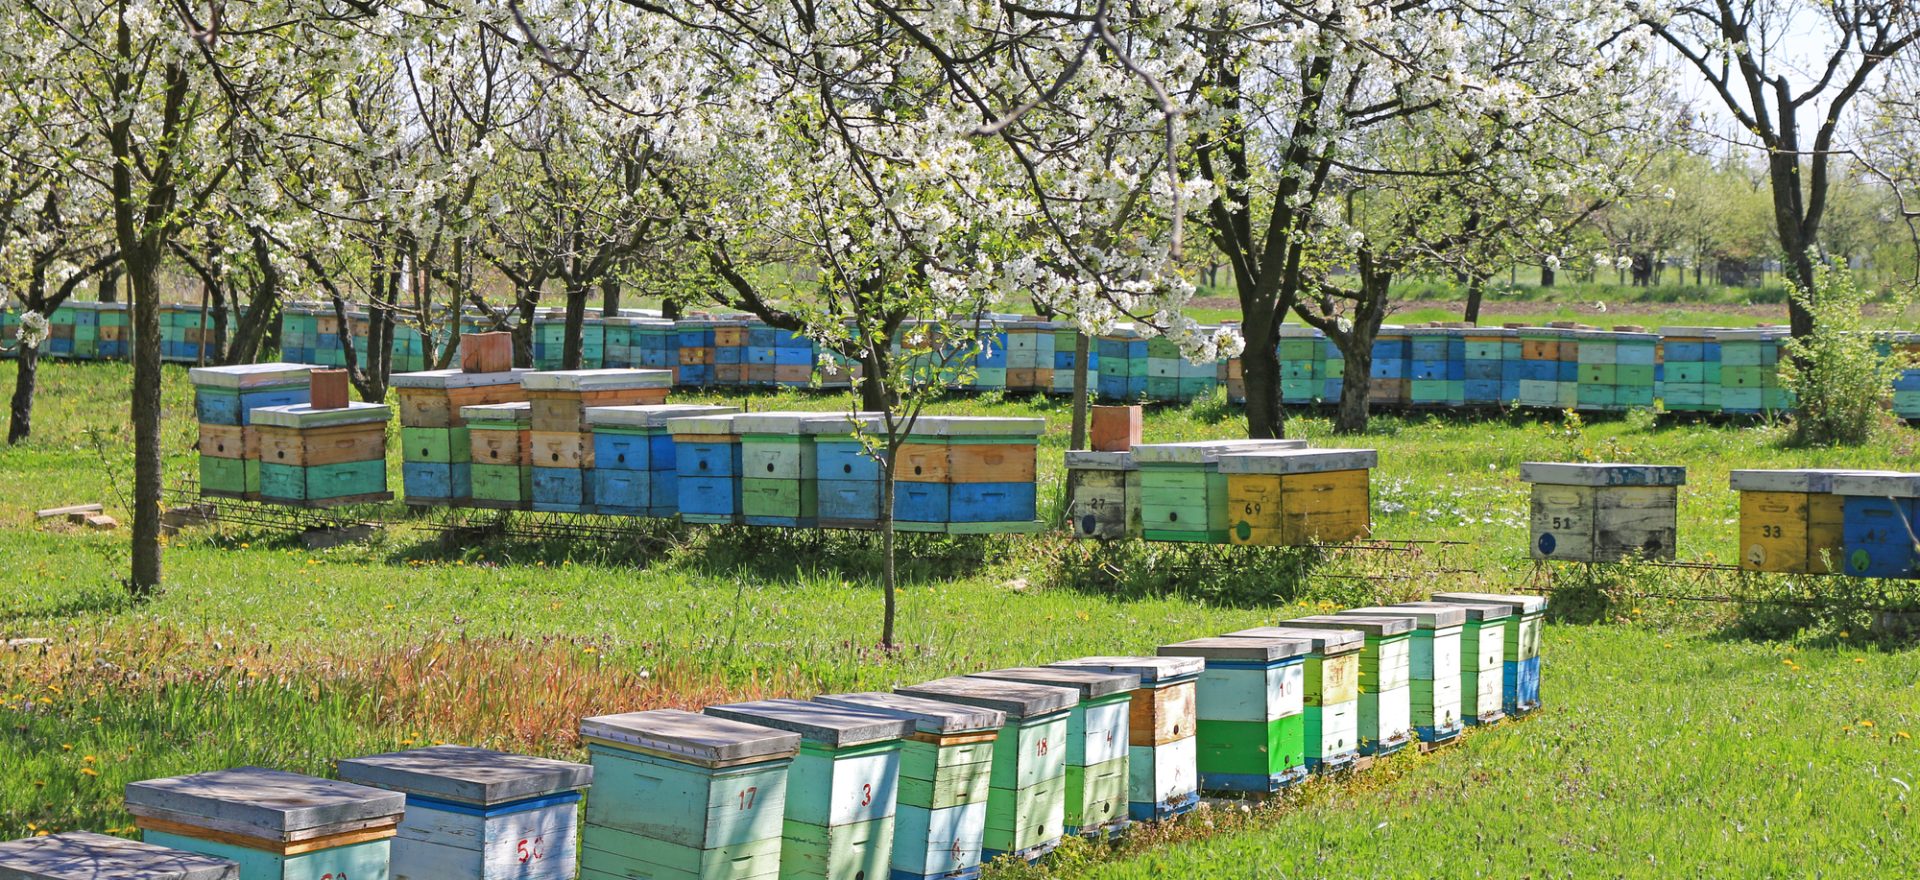 Apiary with Many Beehives